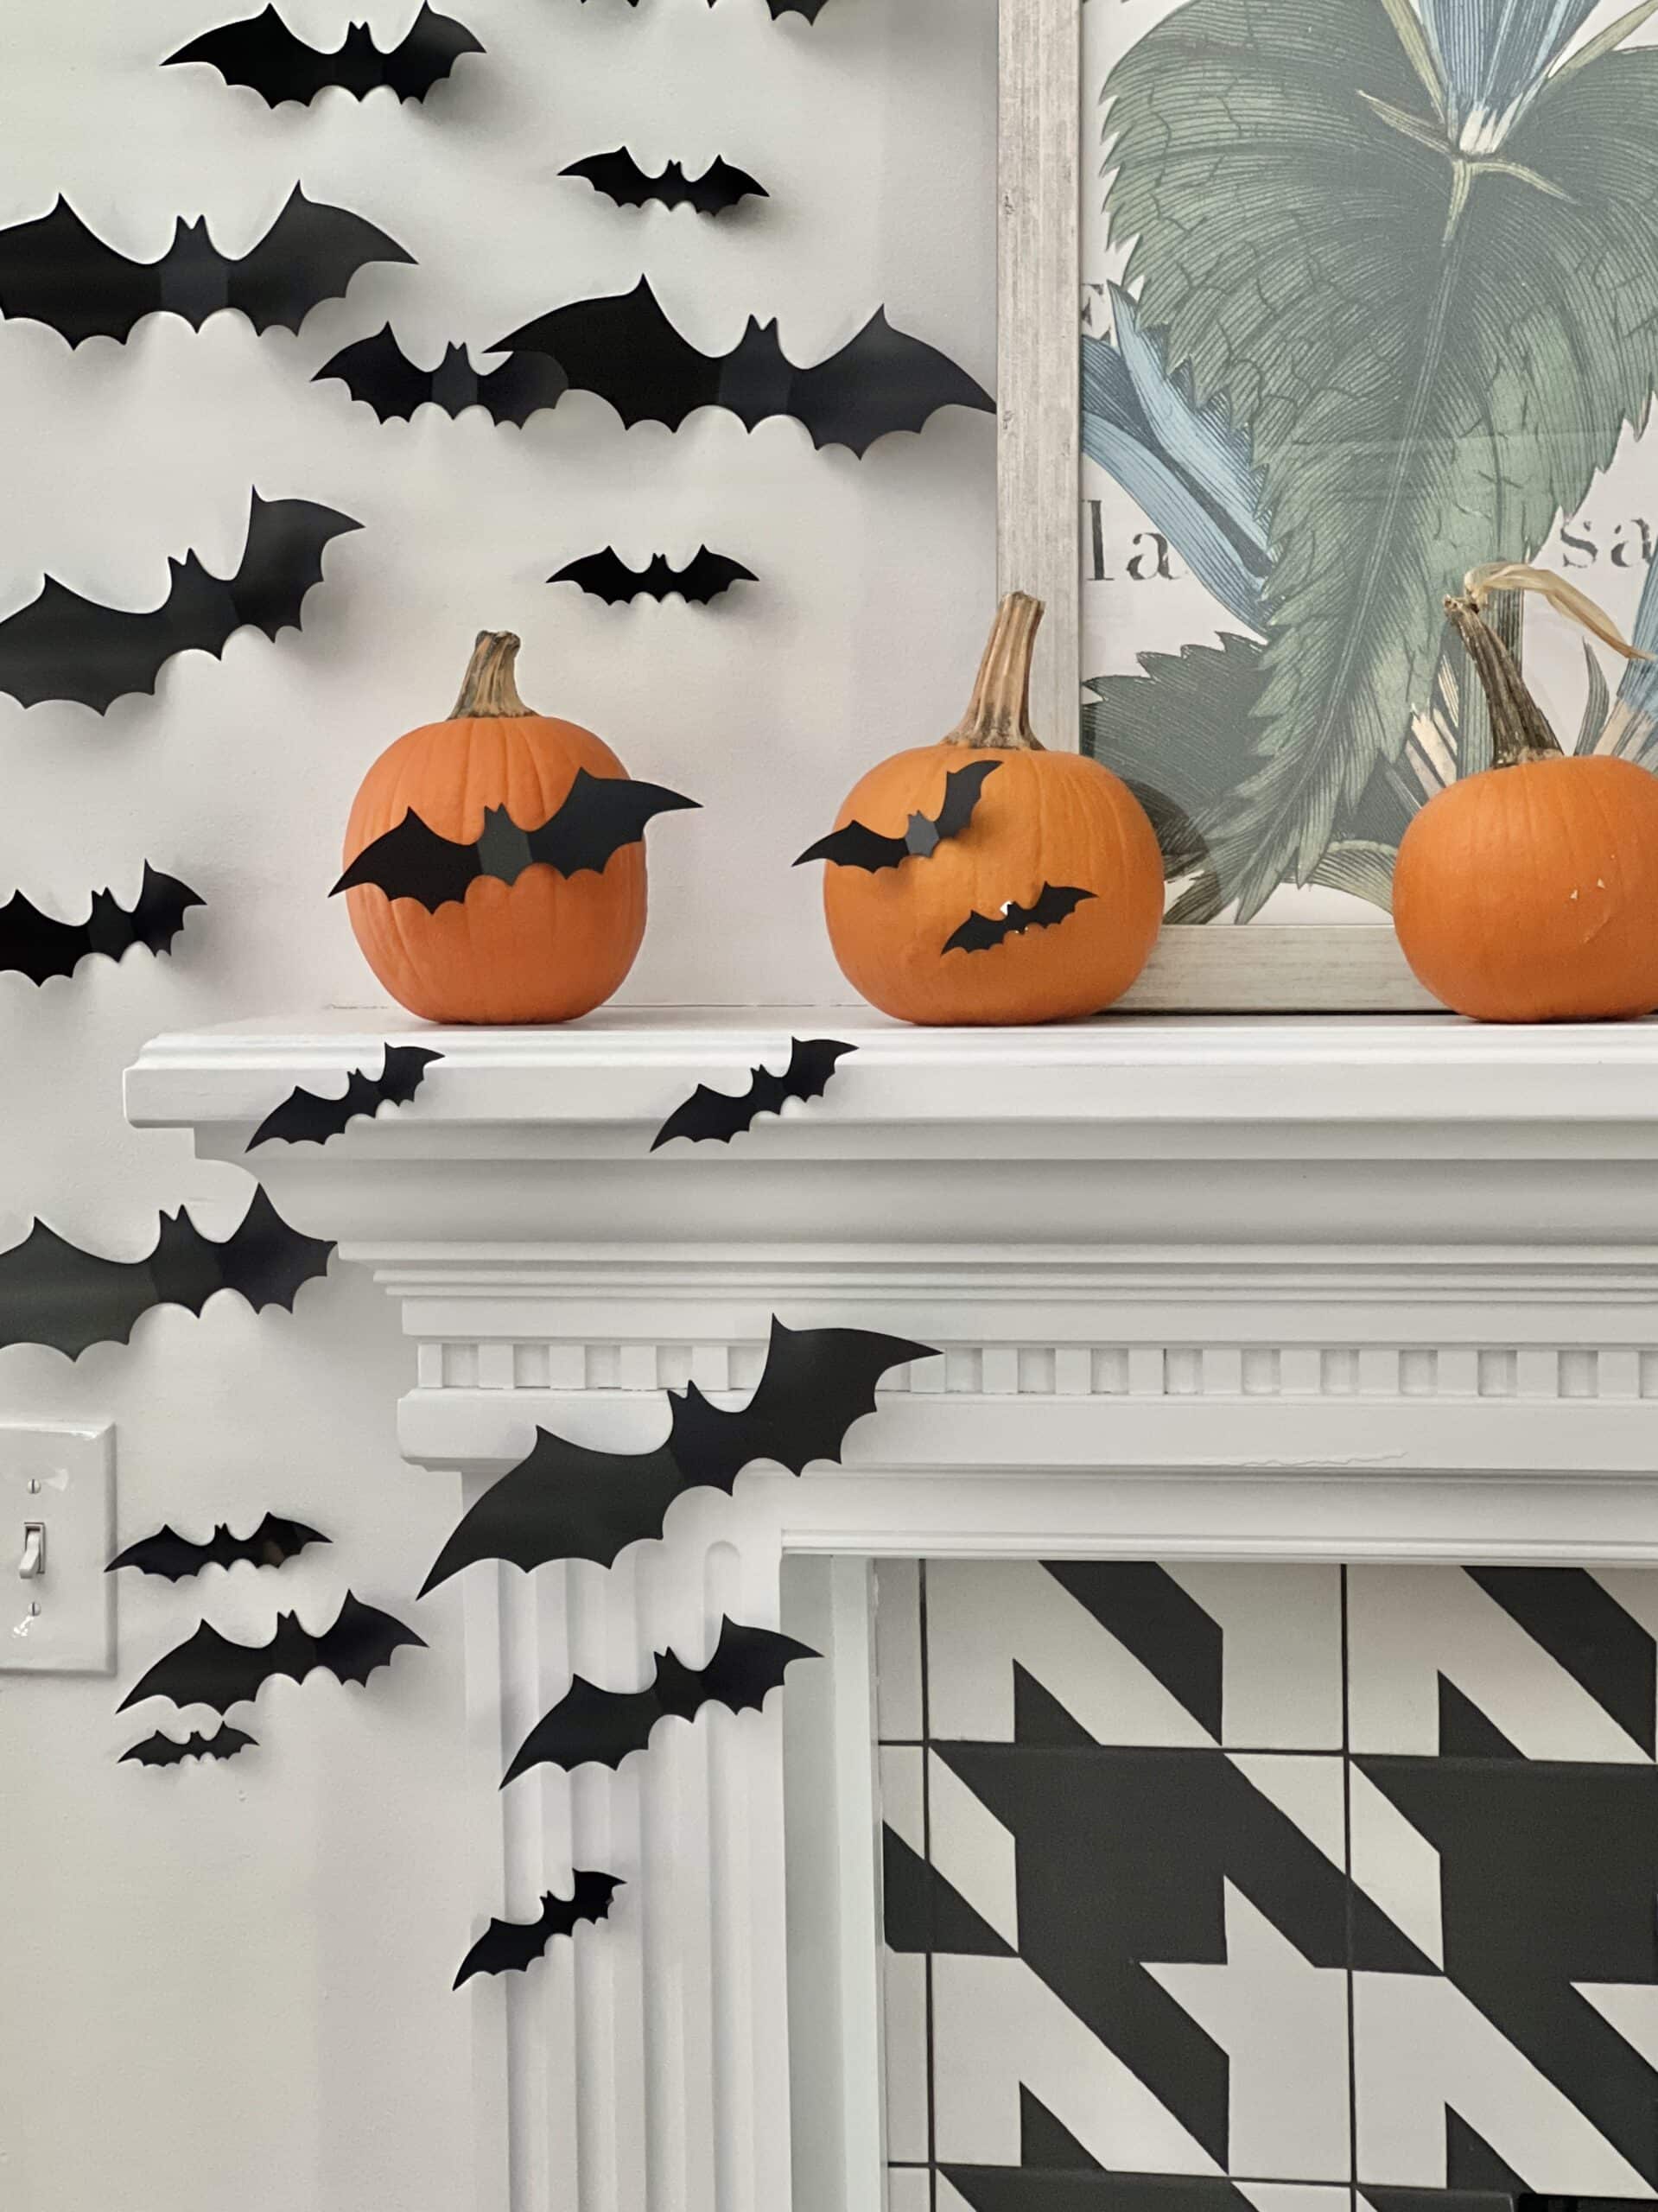 How to Decorate for Halloween with Fireplace Bats